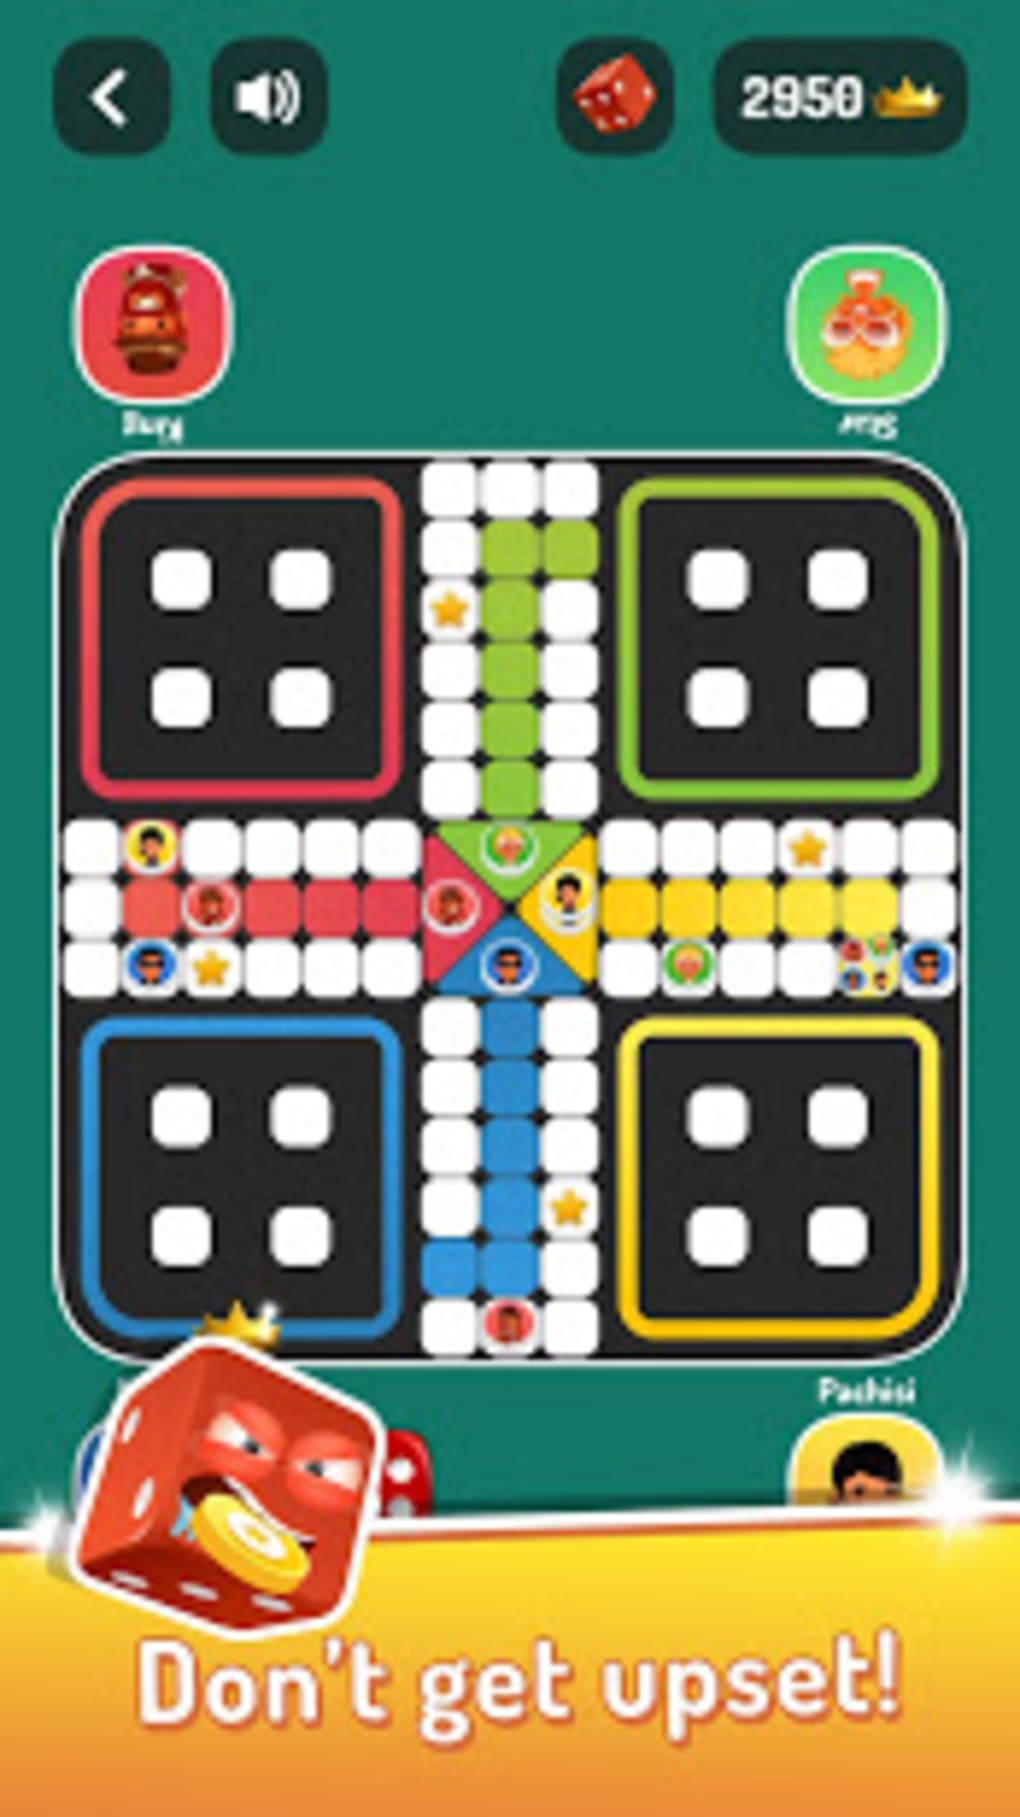 Ludo Parchis Classic Online - Microsoft Apps